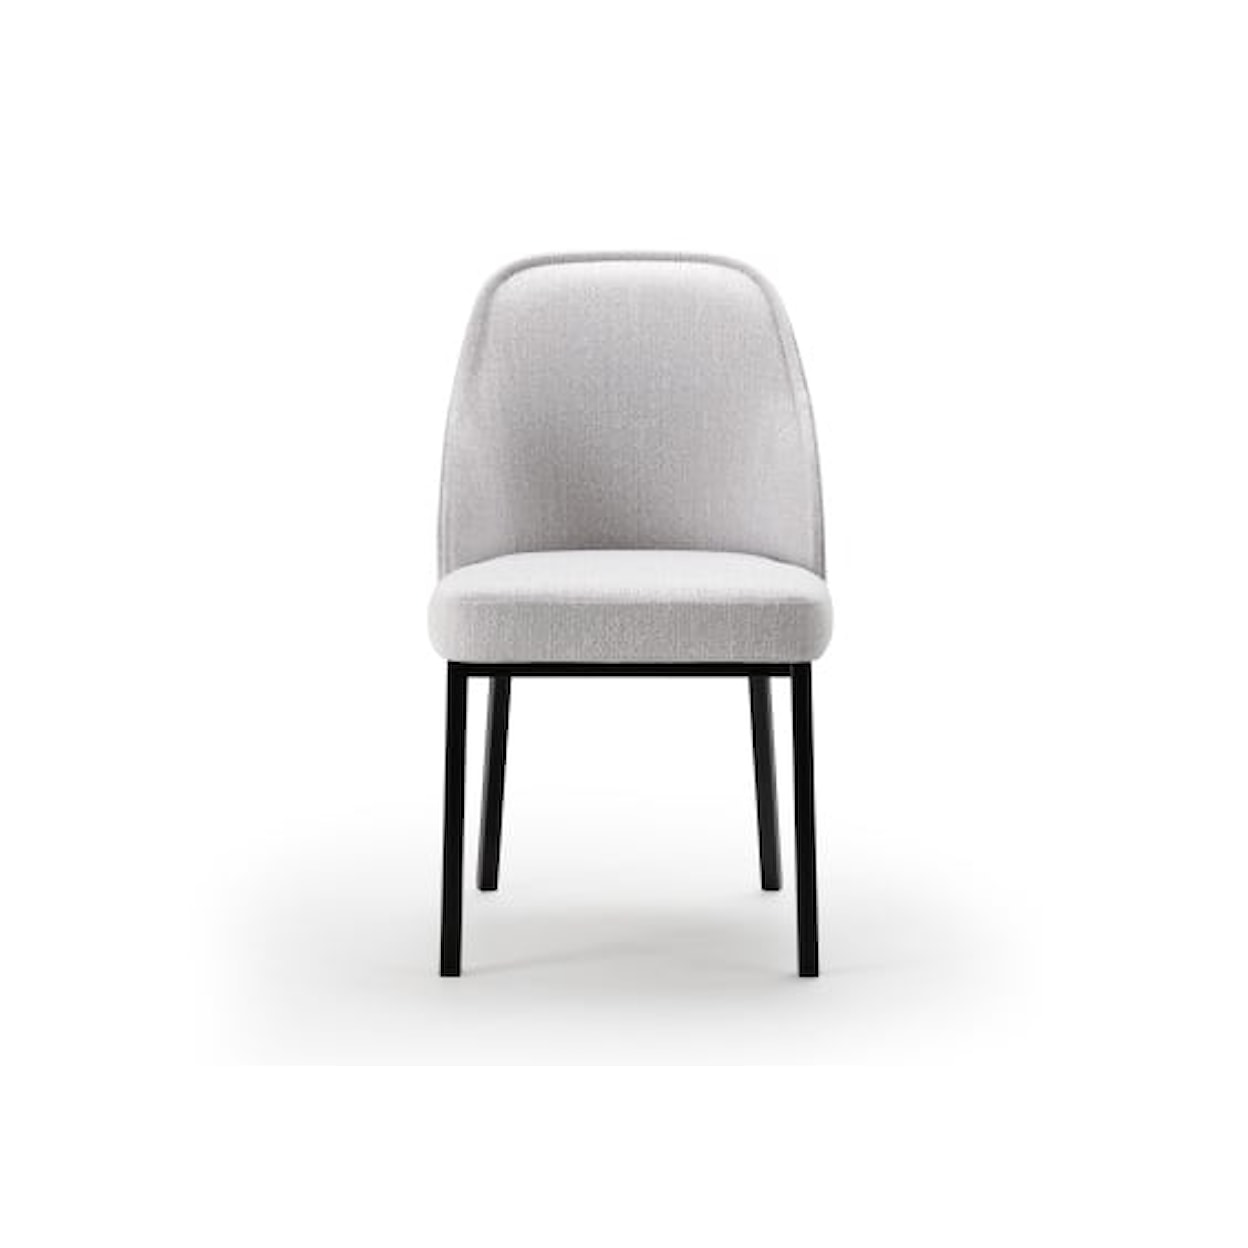 Trica June Dining Chair